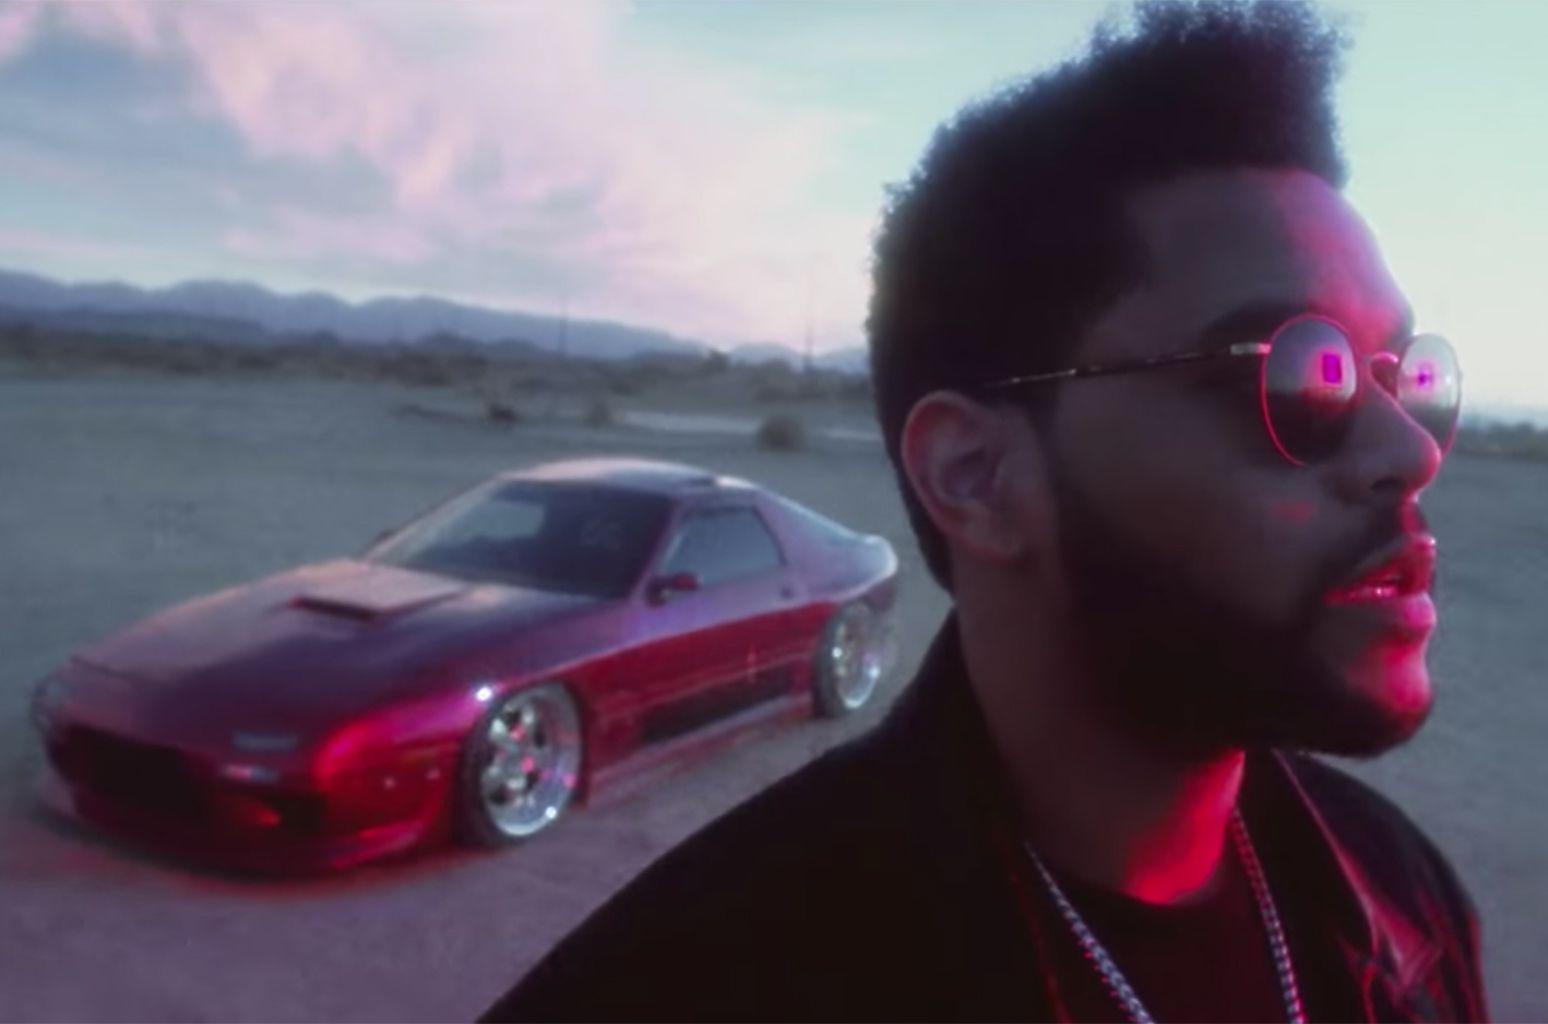 Monster Mazda Logo - The Weeknd 'Party Monster' Video: What You Need to Know About That